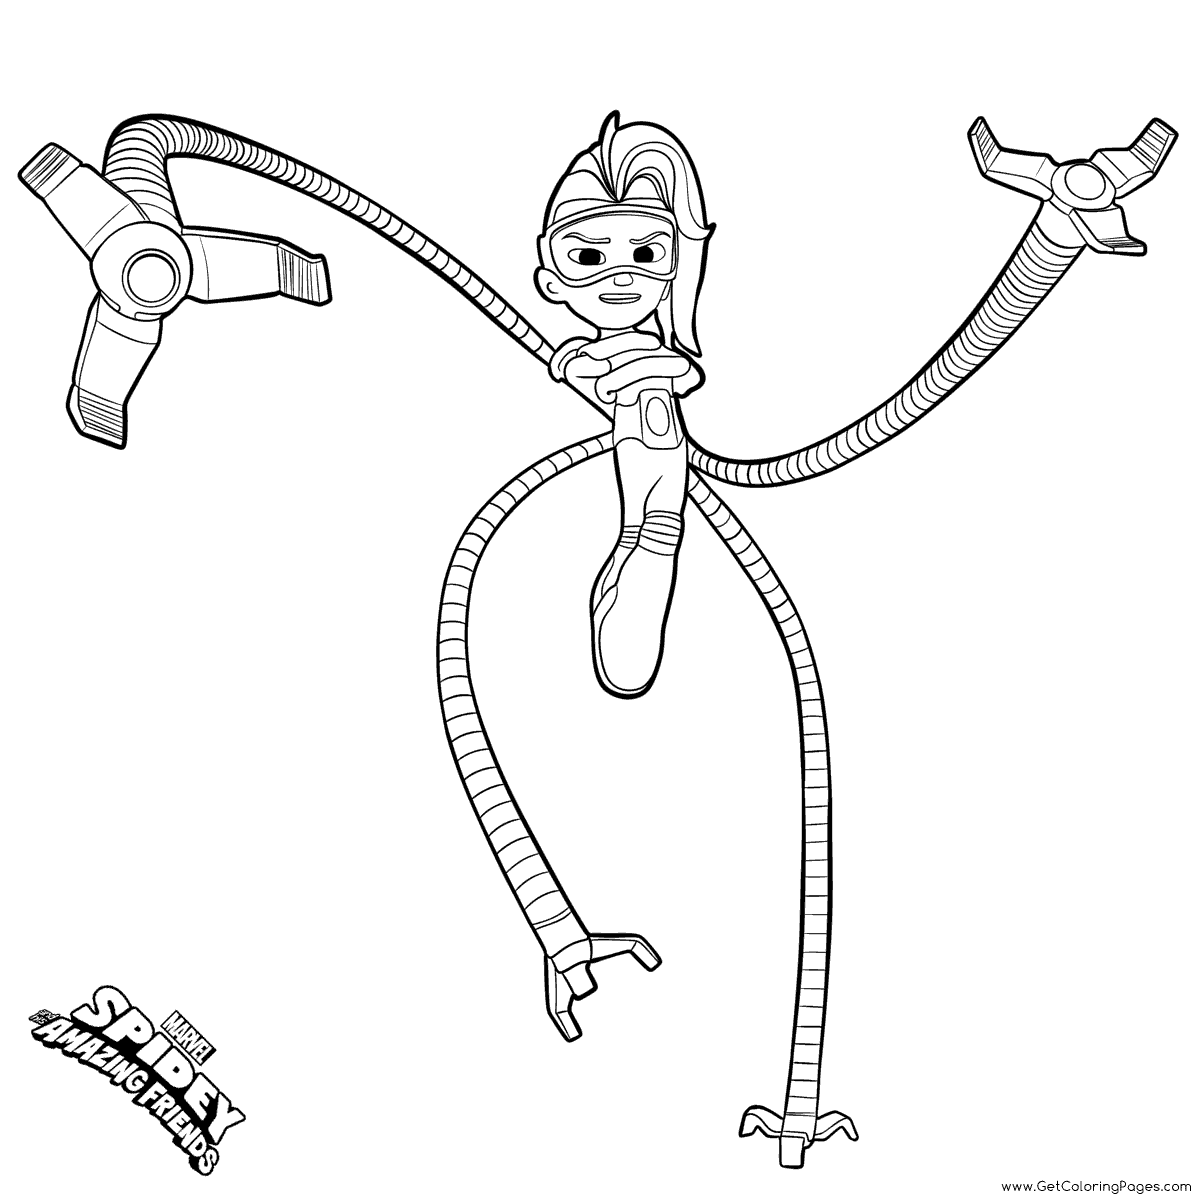 Doctor Octopus Carolyn Trainer Coloring Pages - Get Coloring Pages